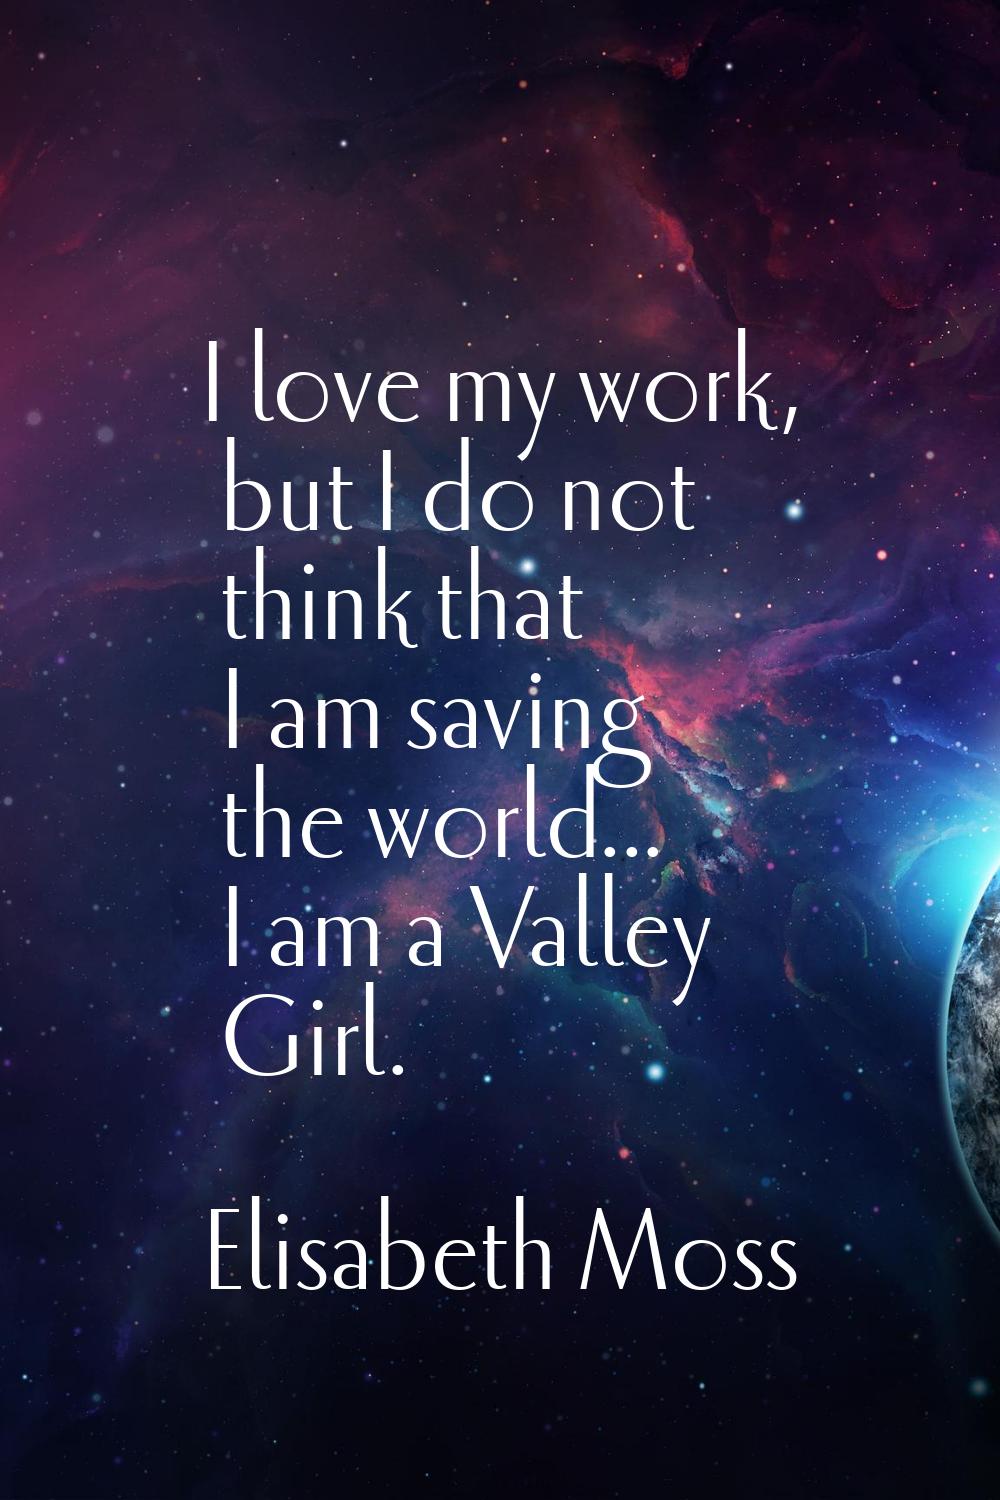 I love my work, but I do not think that I am saving the world... I am a Valley Girl.